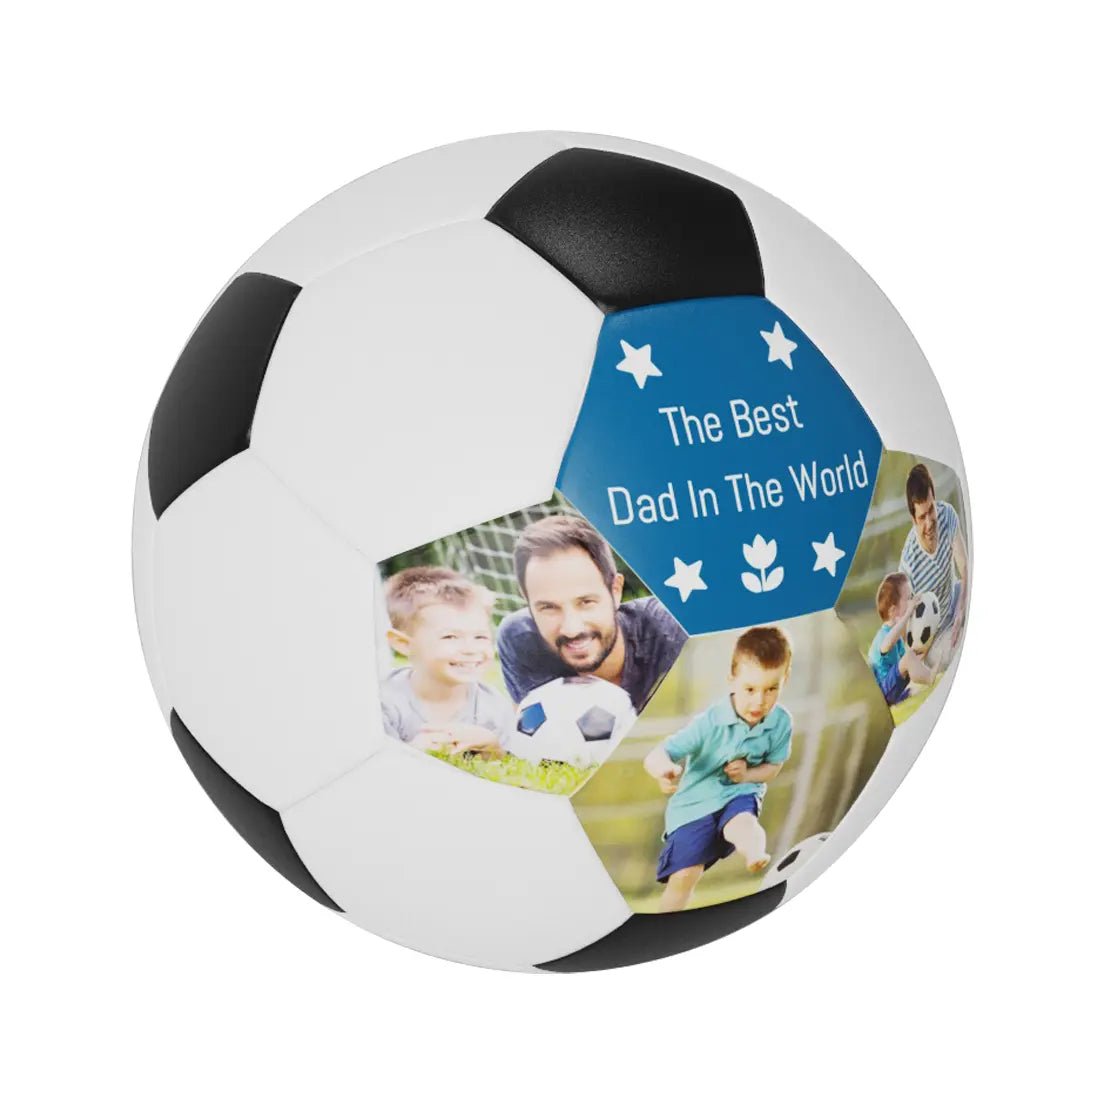 Personalized Custom Father's Day Gifts Soccer Ball No.5 - Family Watchs